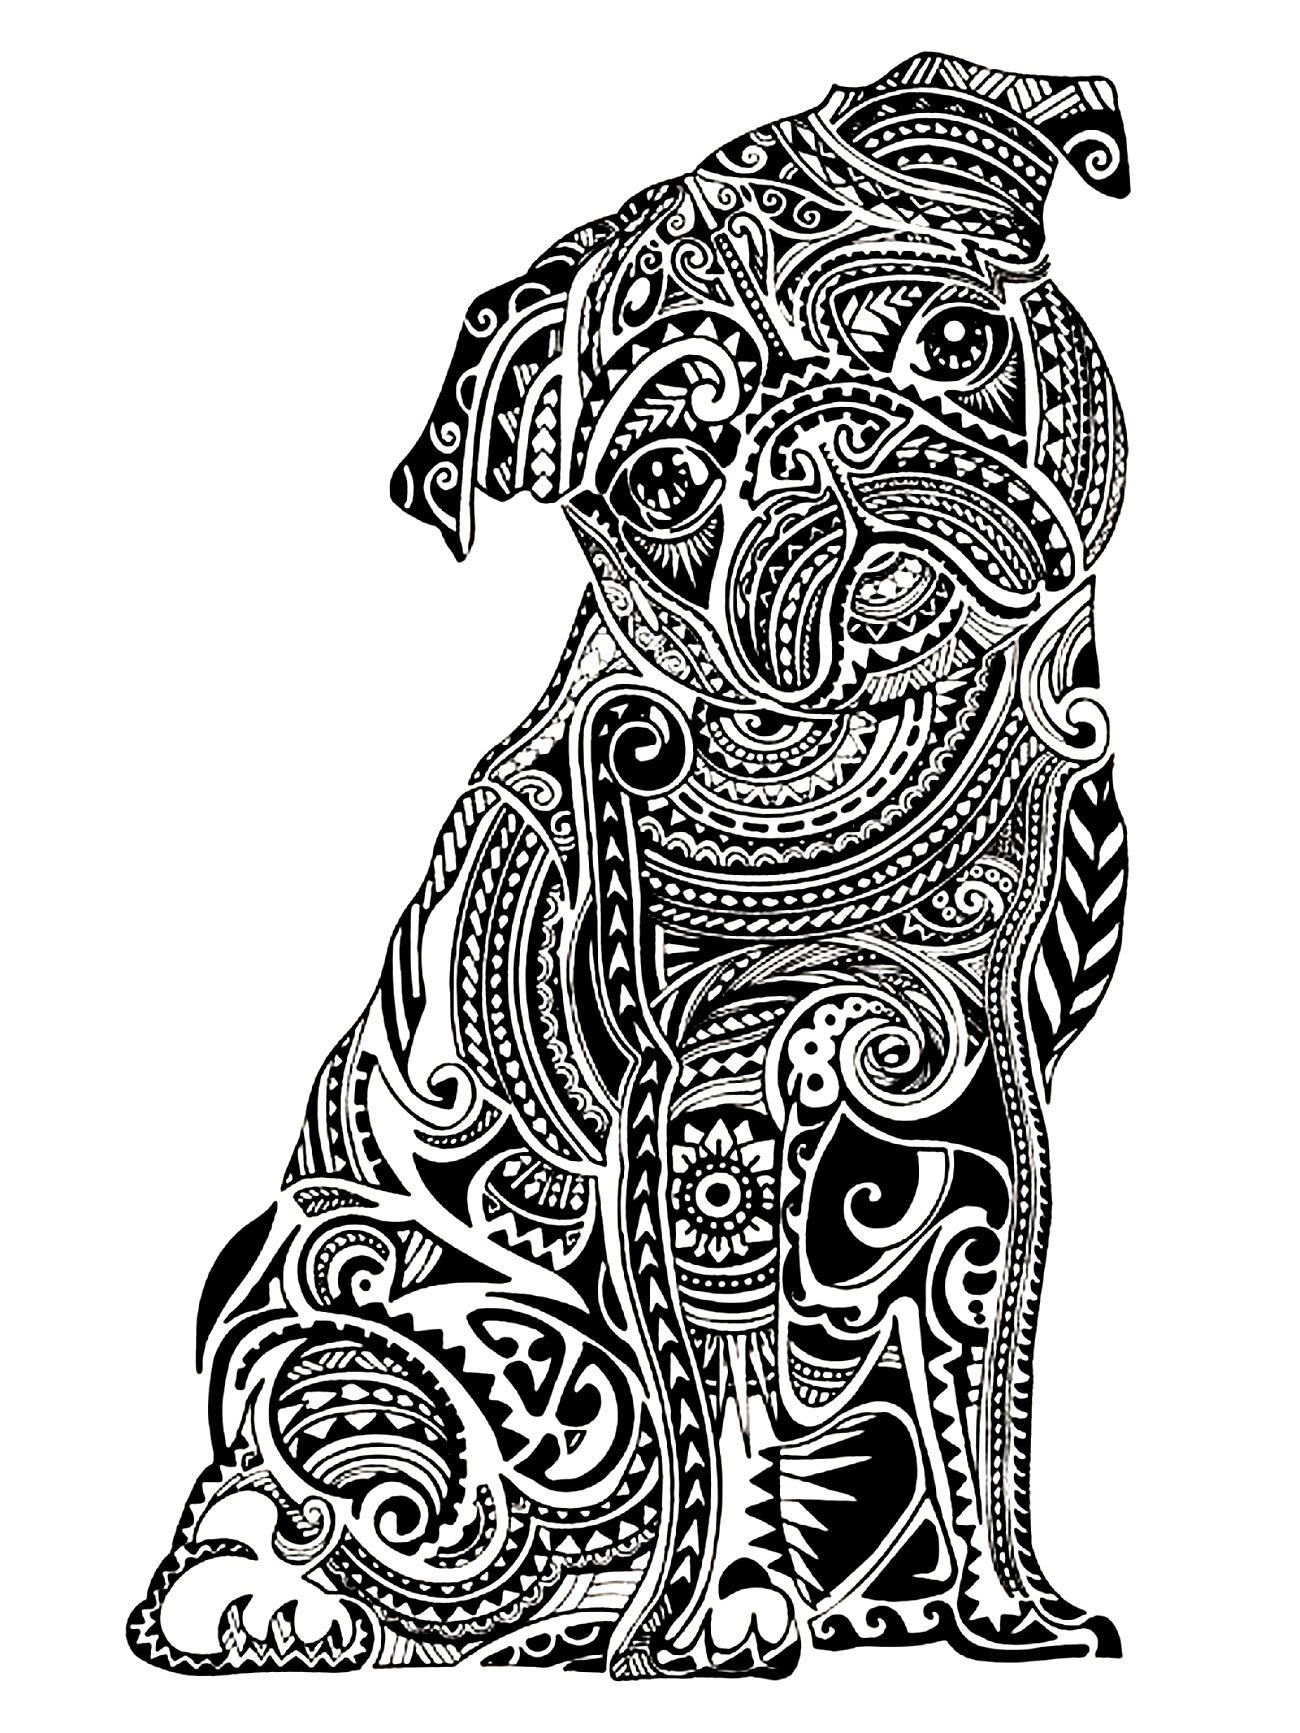 Small bulldog with many abstract motifs. You'll love coloring every detail of this coloring page. The colors can be mixed to create different effects and tones, adding even more interest to your composition.